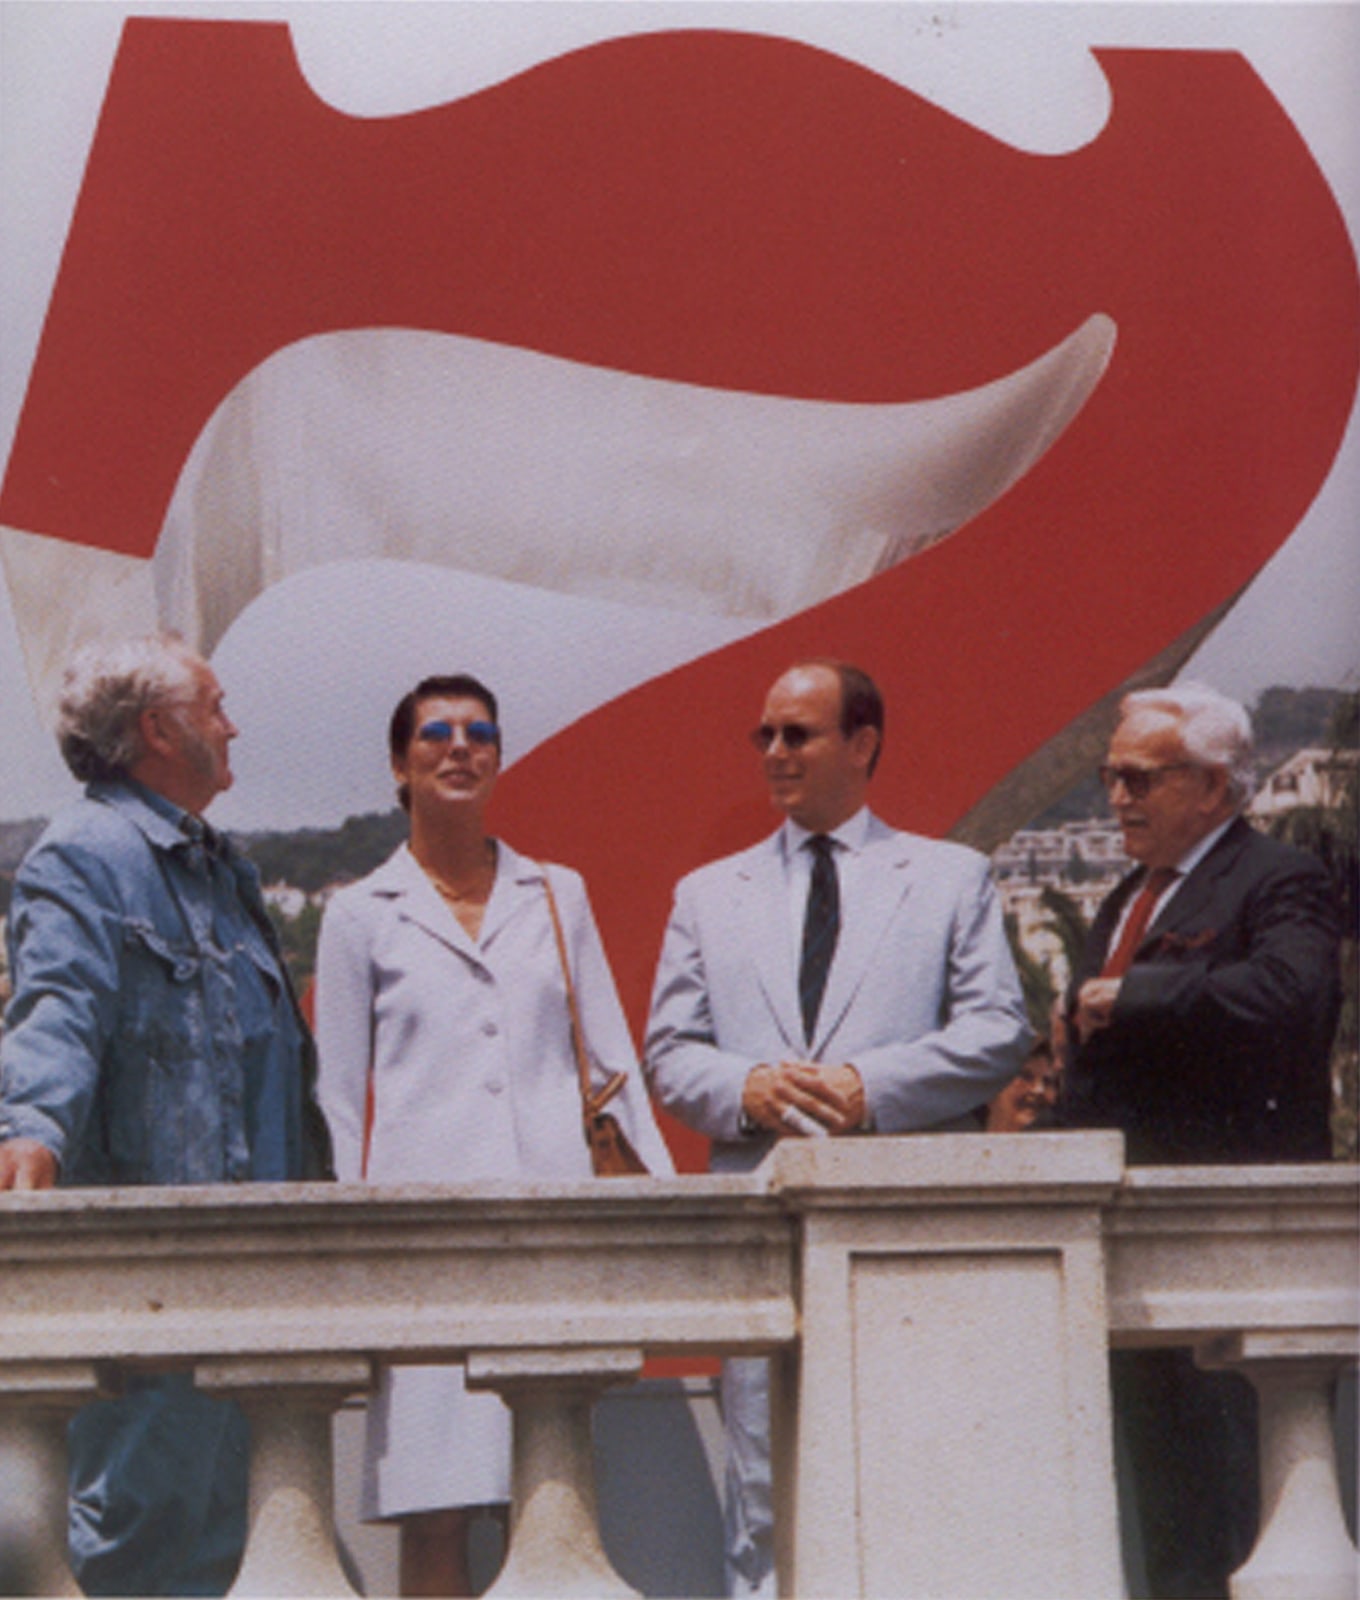 Left to right: Indiana, Princess Stephanie of Monaco, Prince Albert II of Monaco, and Prince Rainier III of Monaco, in front of Indiana&amp;rsquo;s sculpture Seven (1980) in Monte Carlo, 1997

Courtesy of the artist